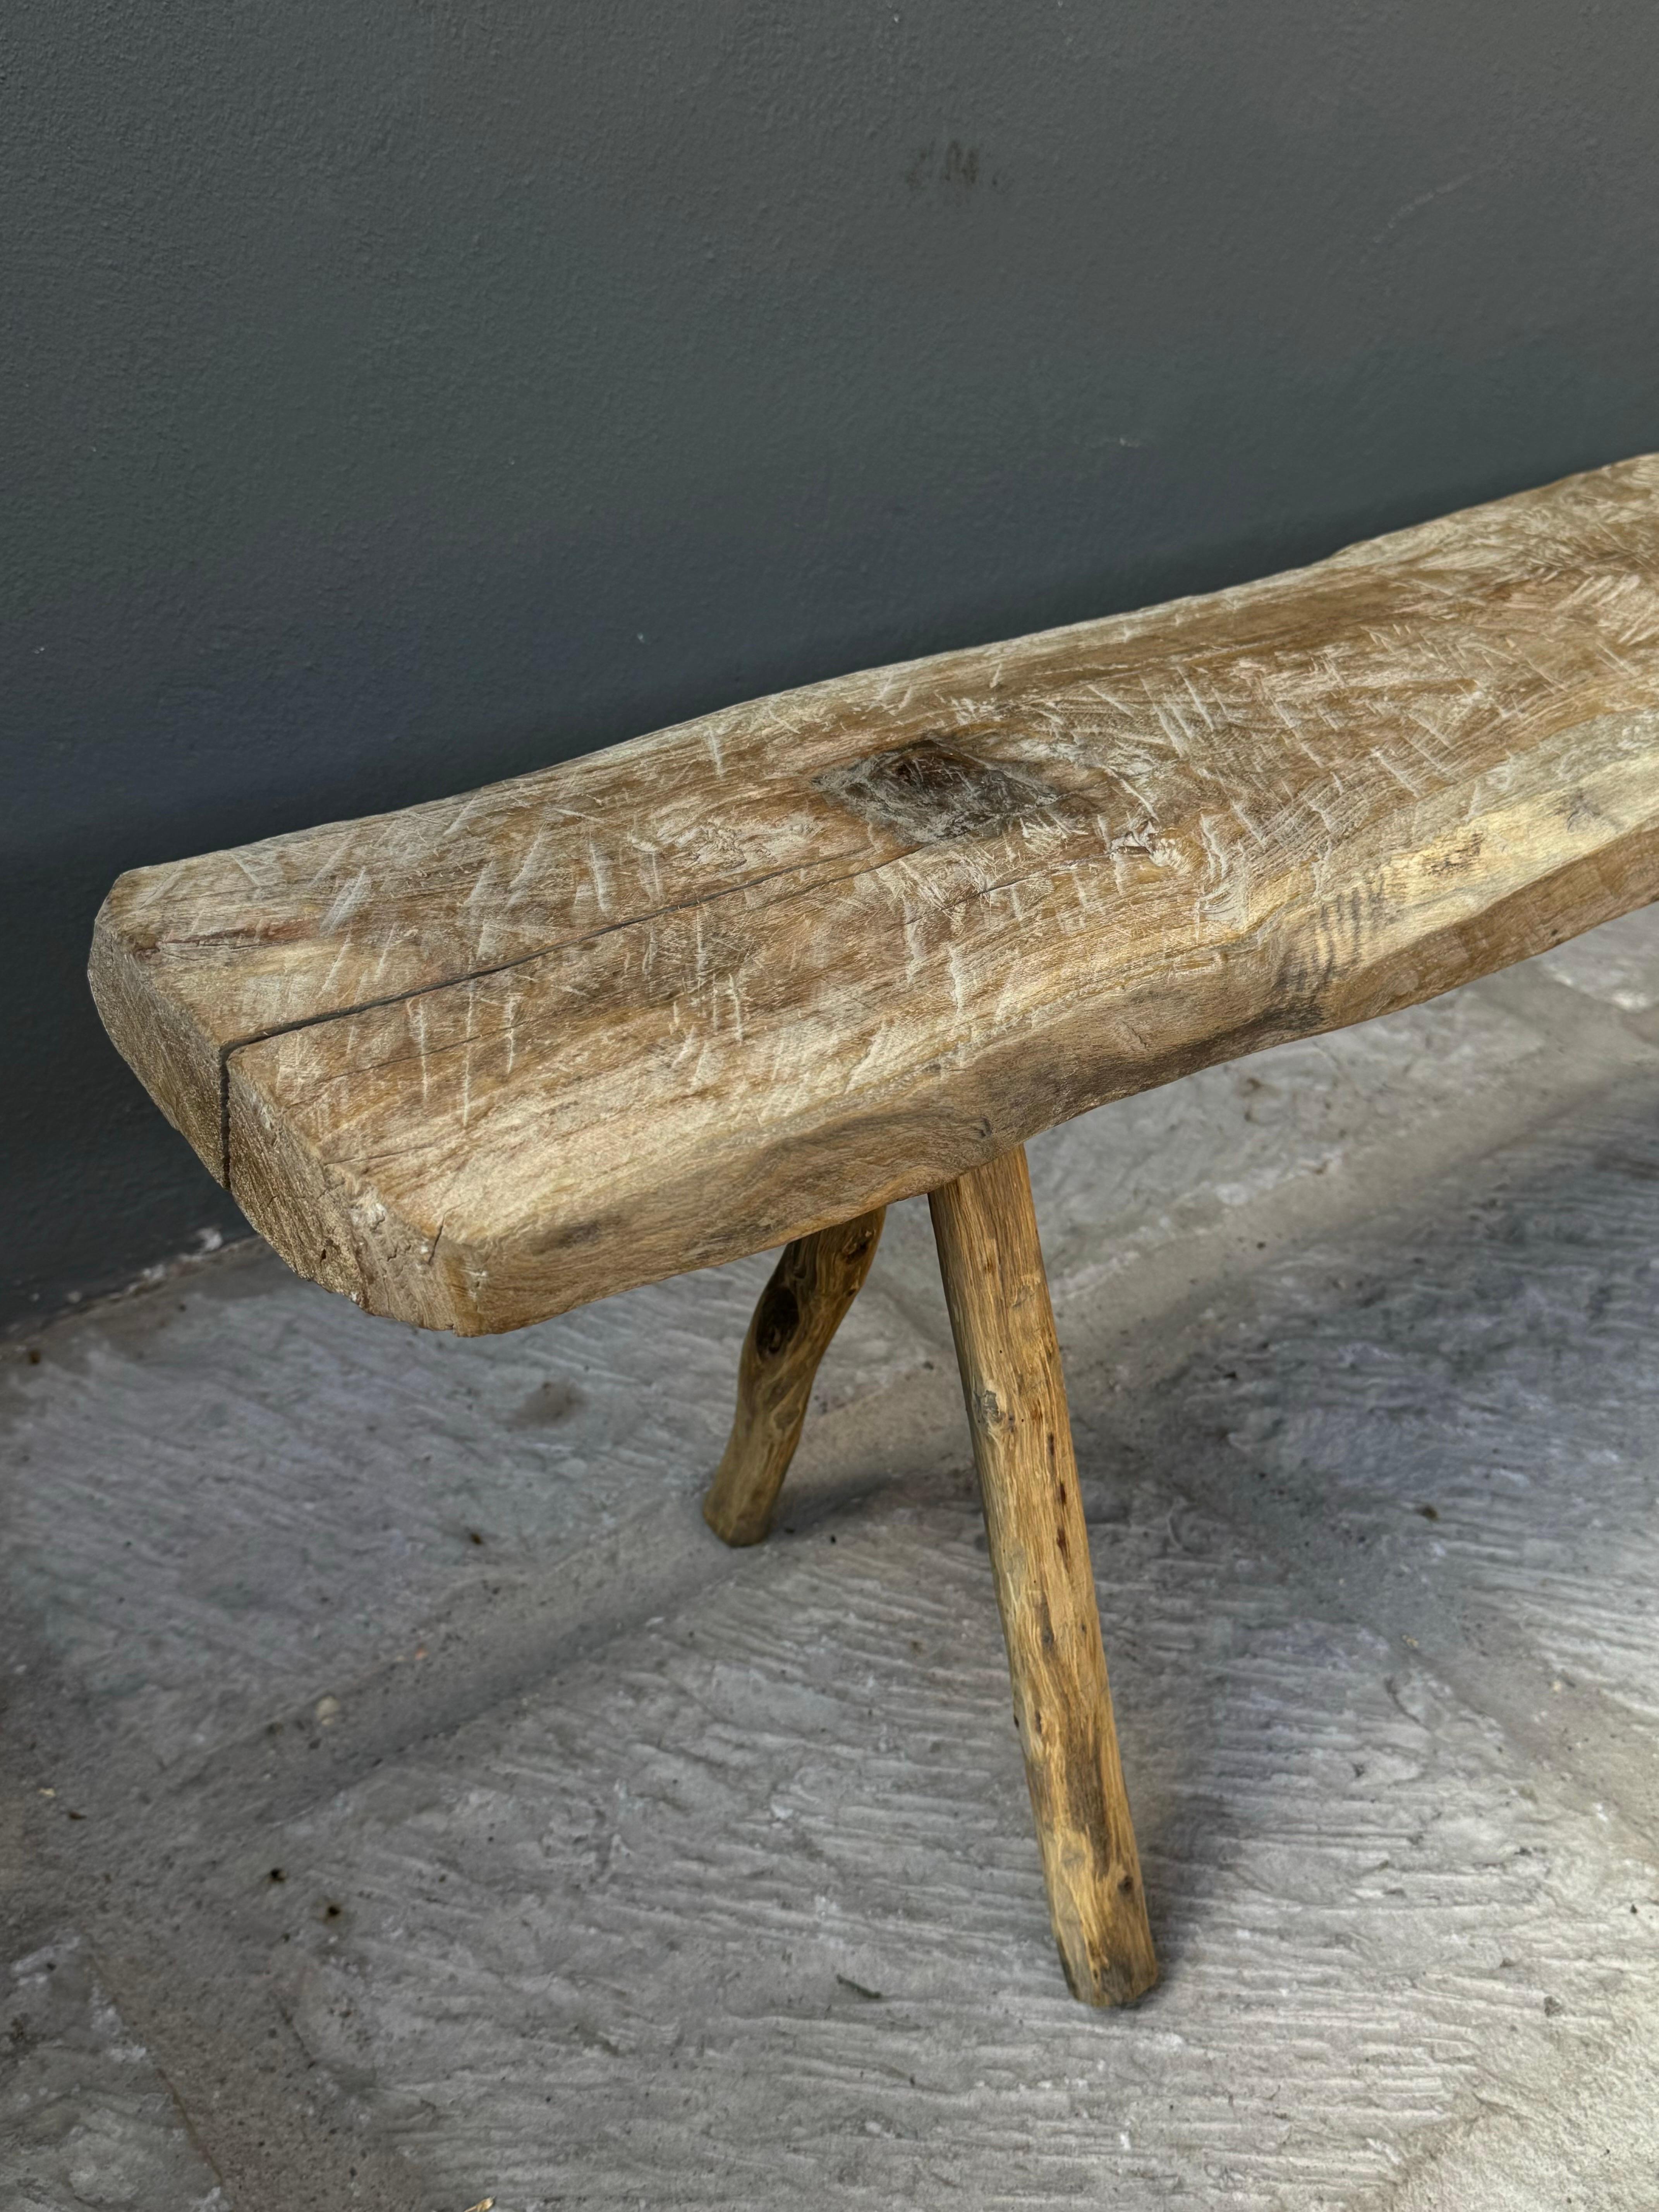 Late 20th Century Hand-Carved Primitive Sabino Bench From San Luis Potosí, Mexico